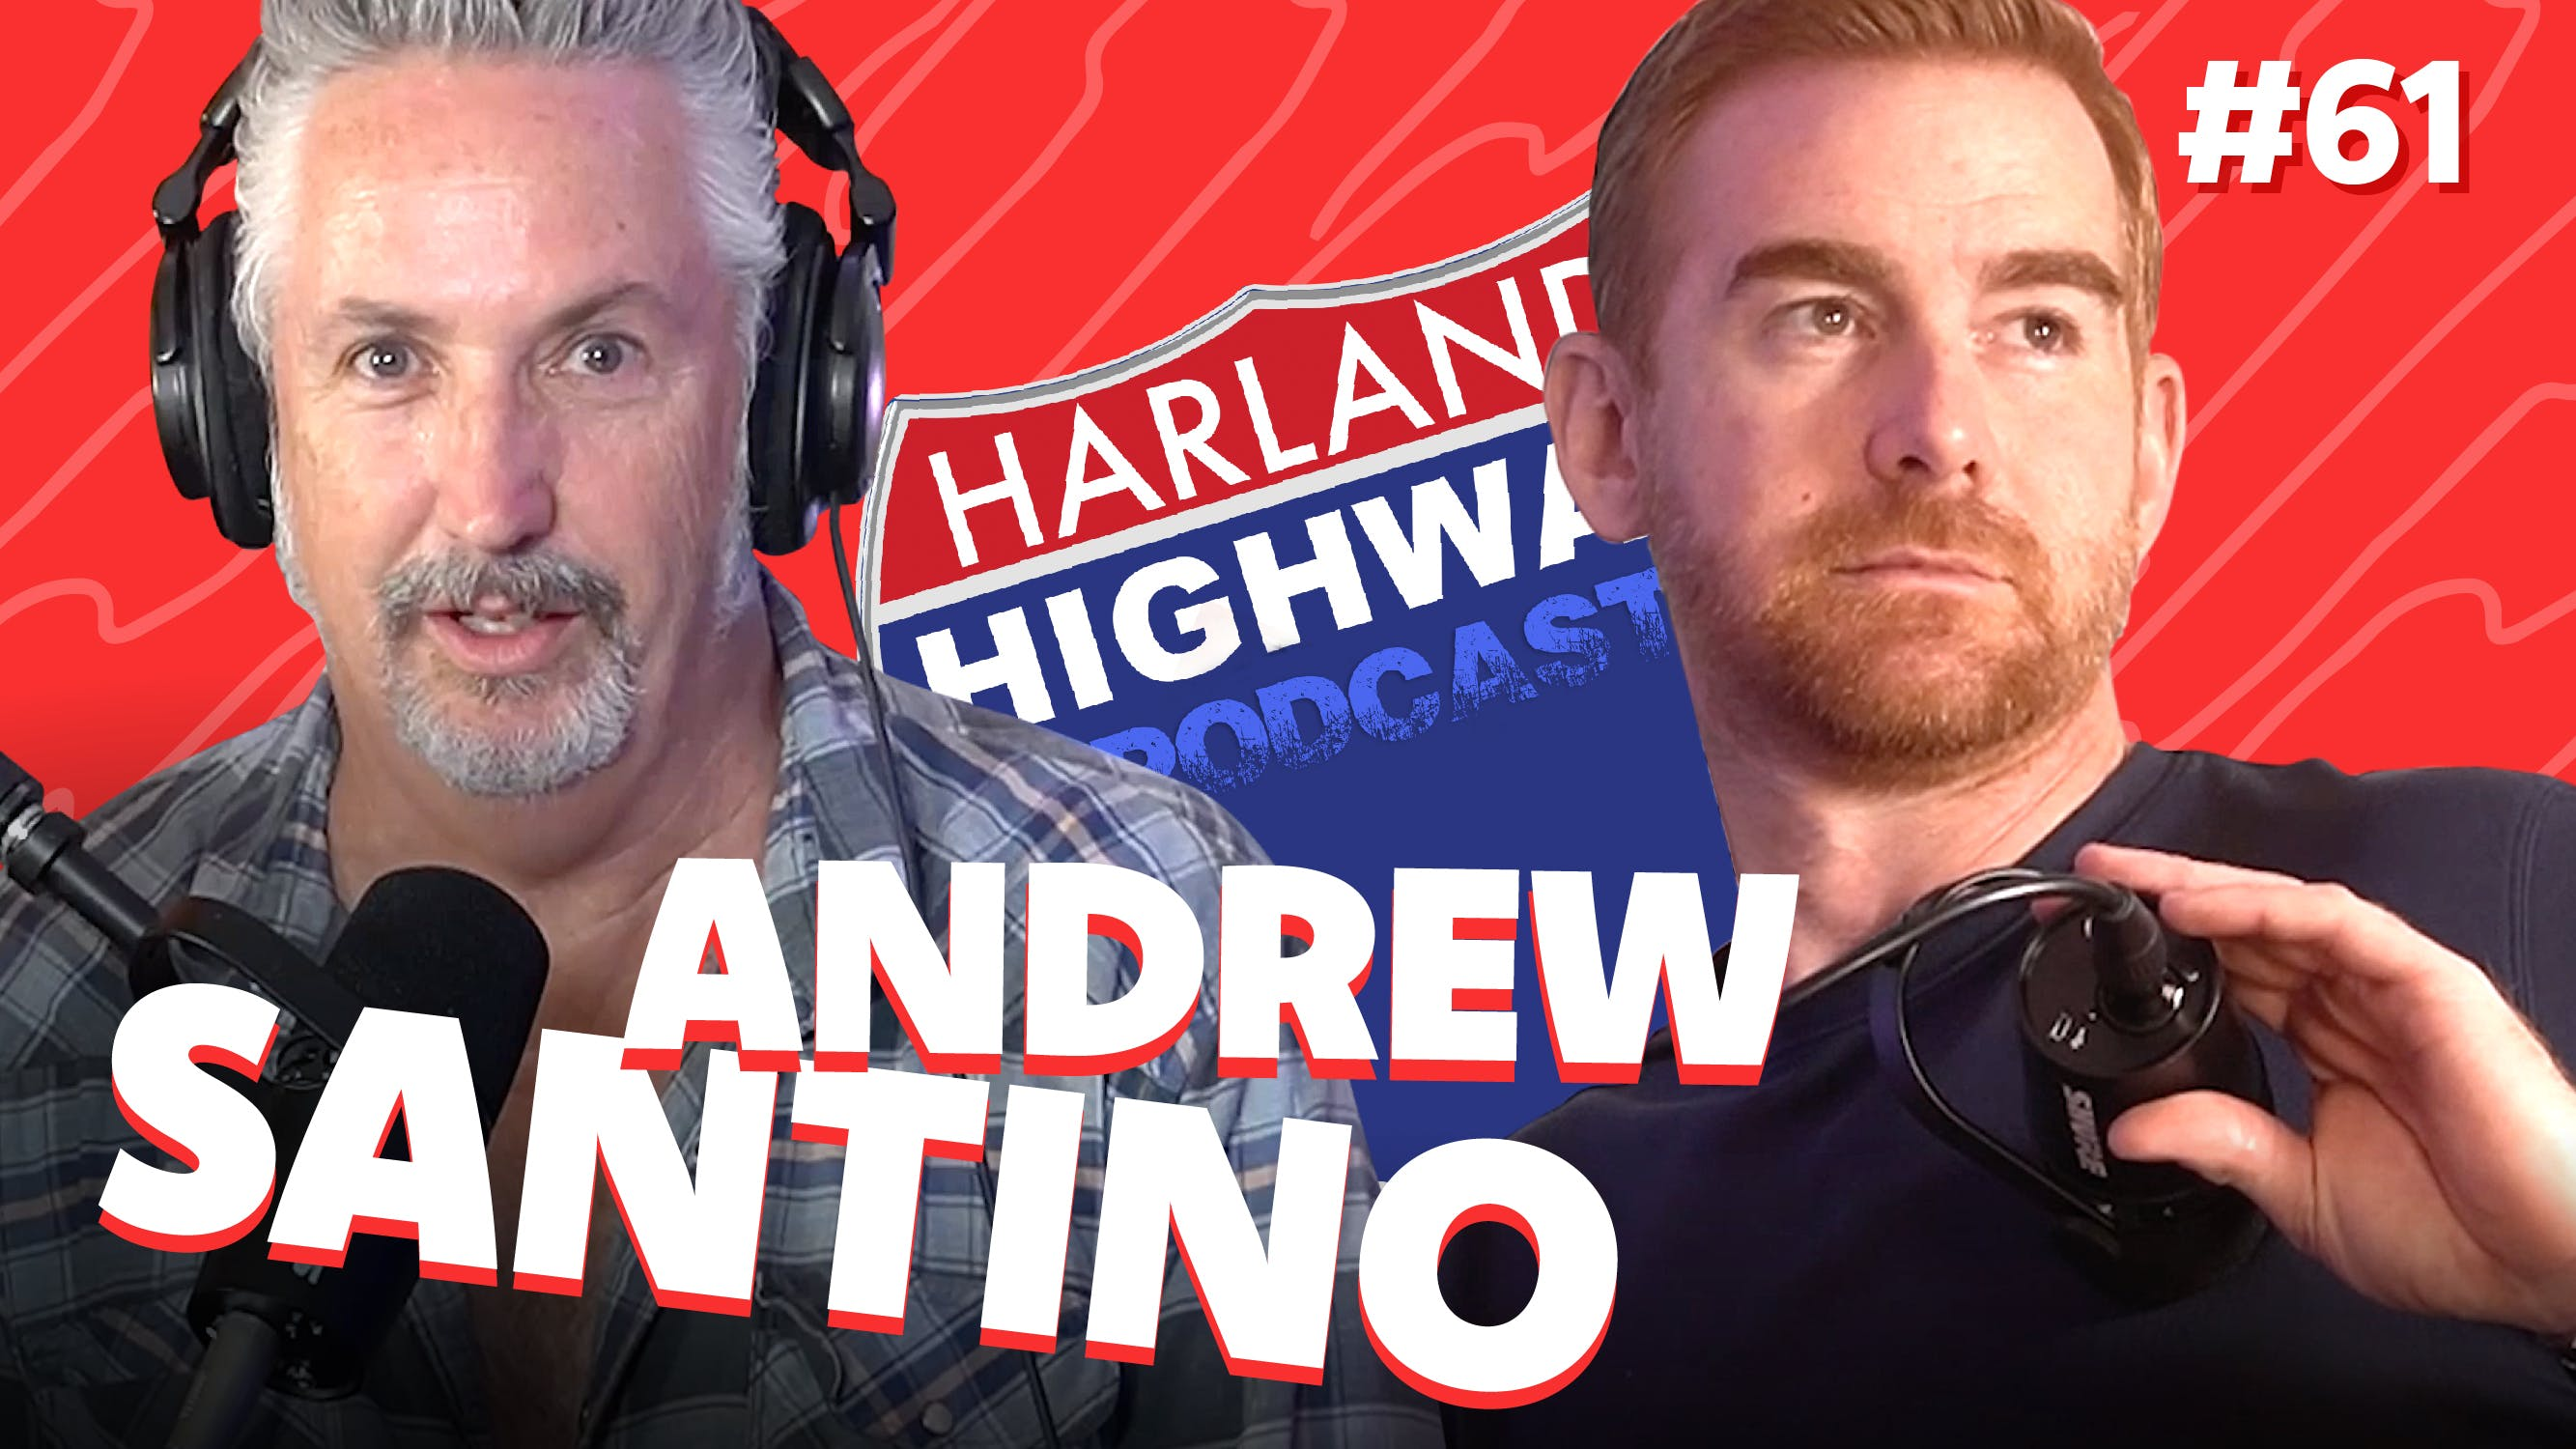 NEW HARLAND HIGHWAY #61 - ANDREW SANTINO, Comedian, Actor, Podcaster.